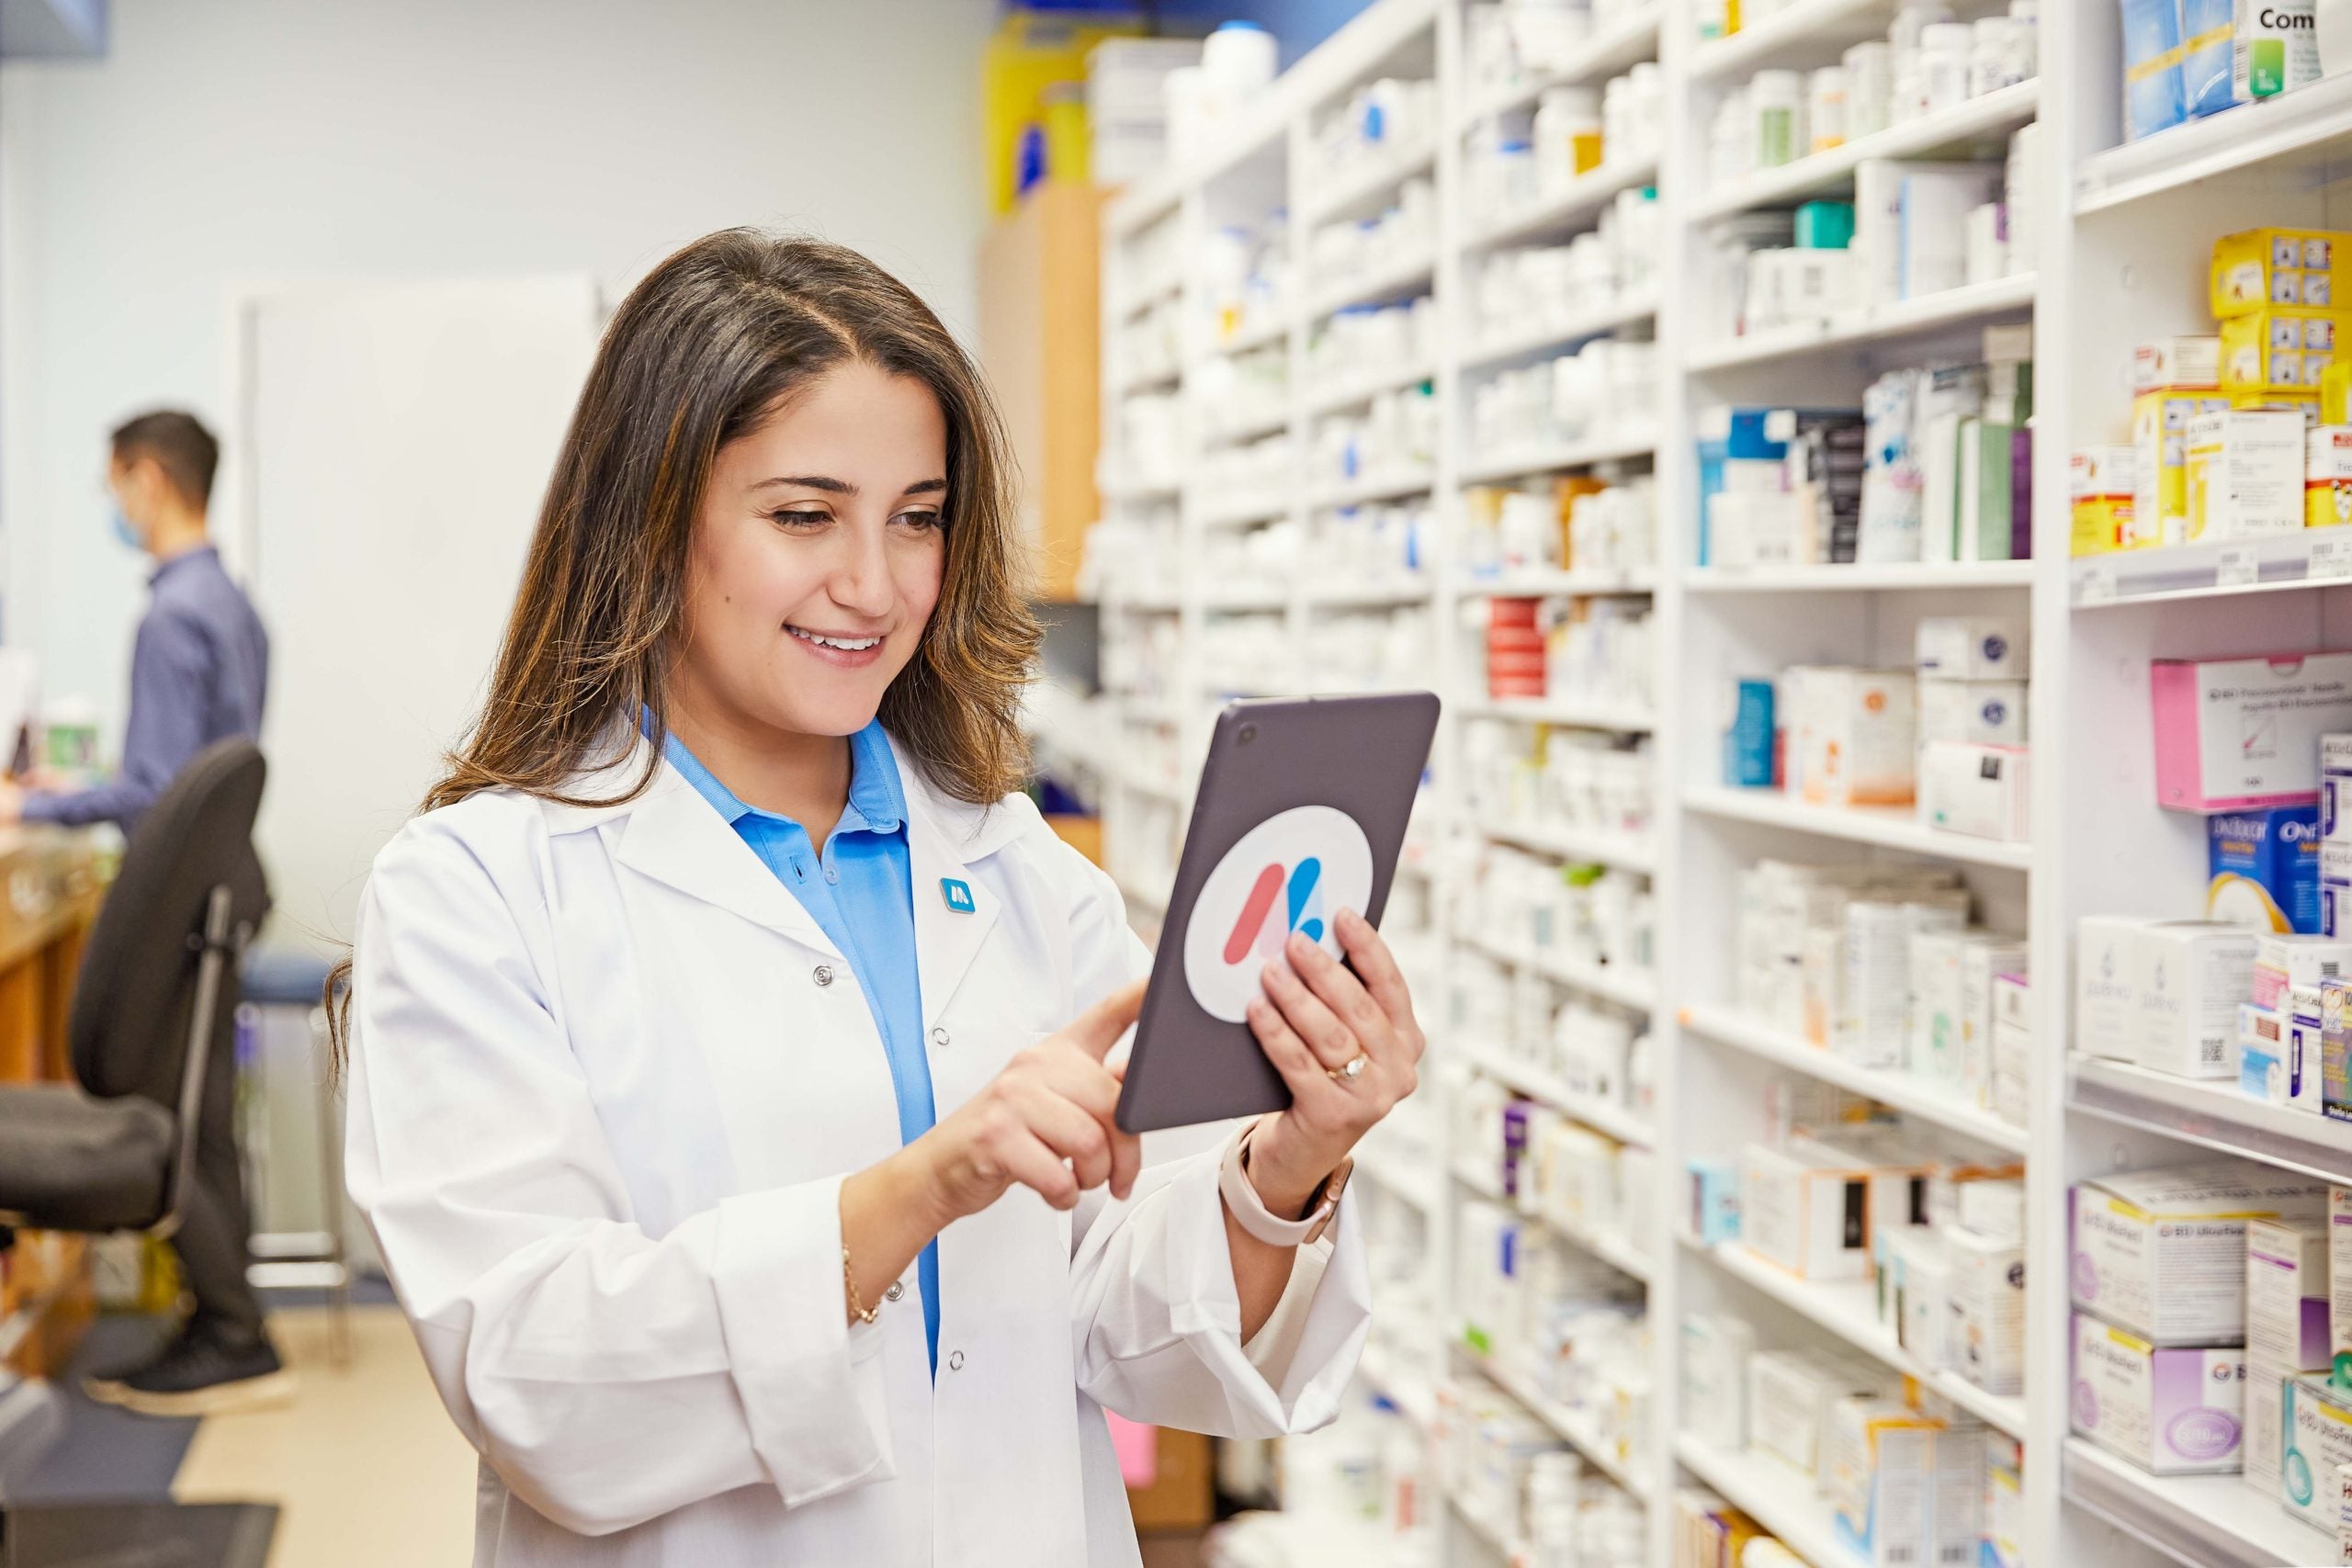 Questions You Should be Asking Your Pharmacist (but probably aren’t)